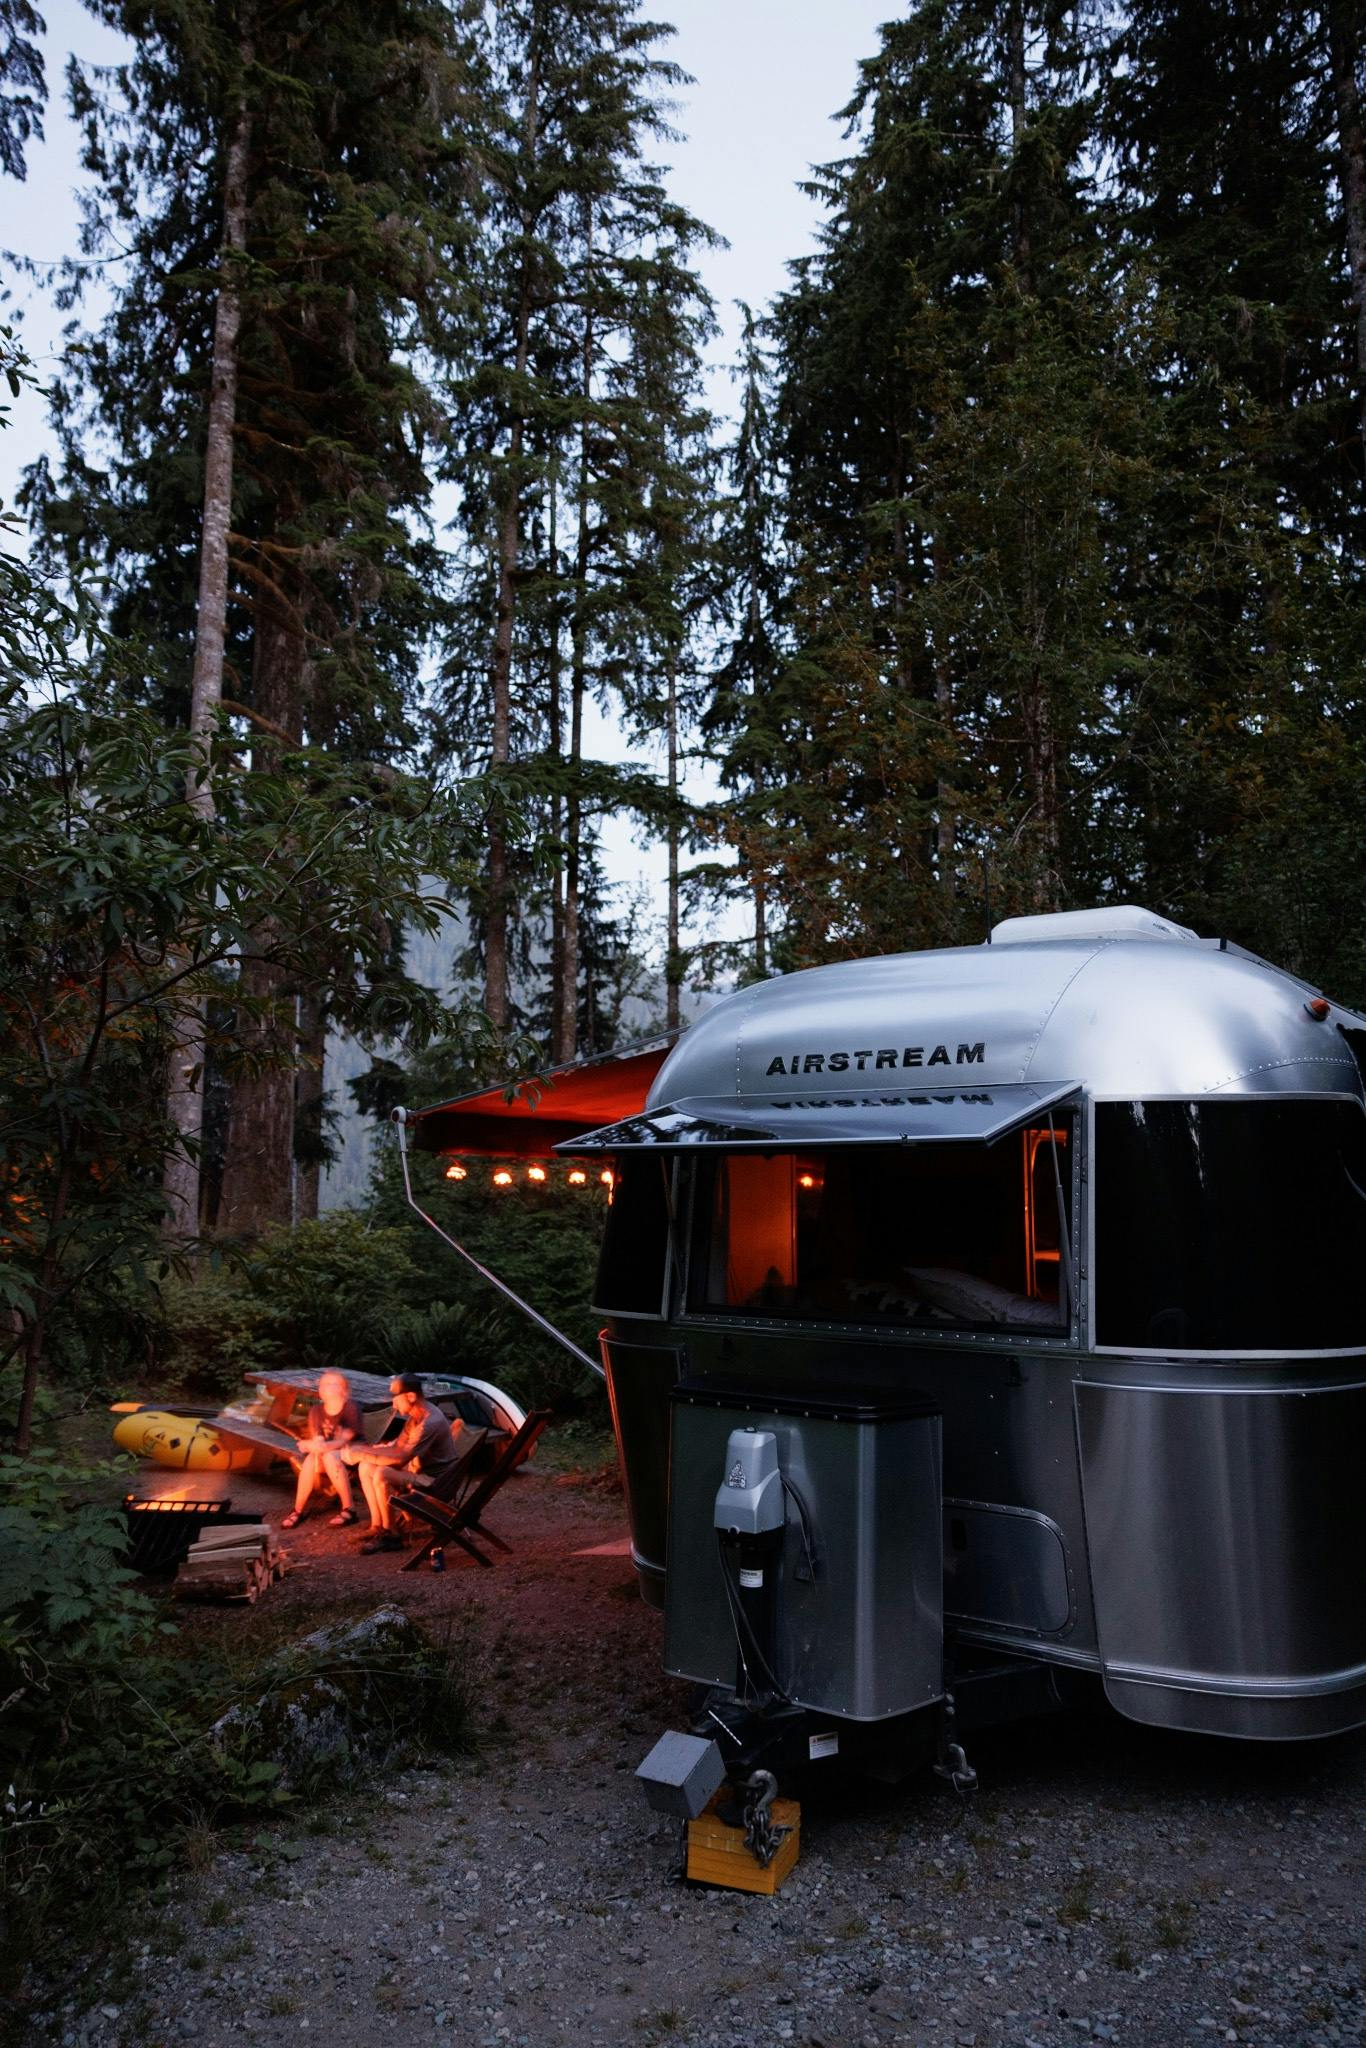 Karen Blue's family sitting by a campfire next to their Airstream travel trailer in a National Forest